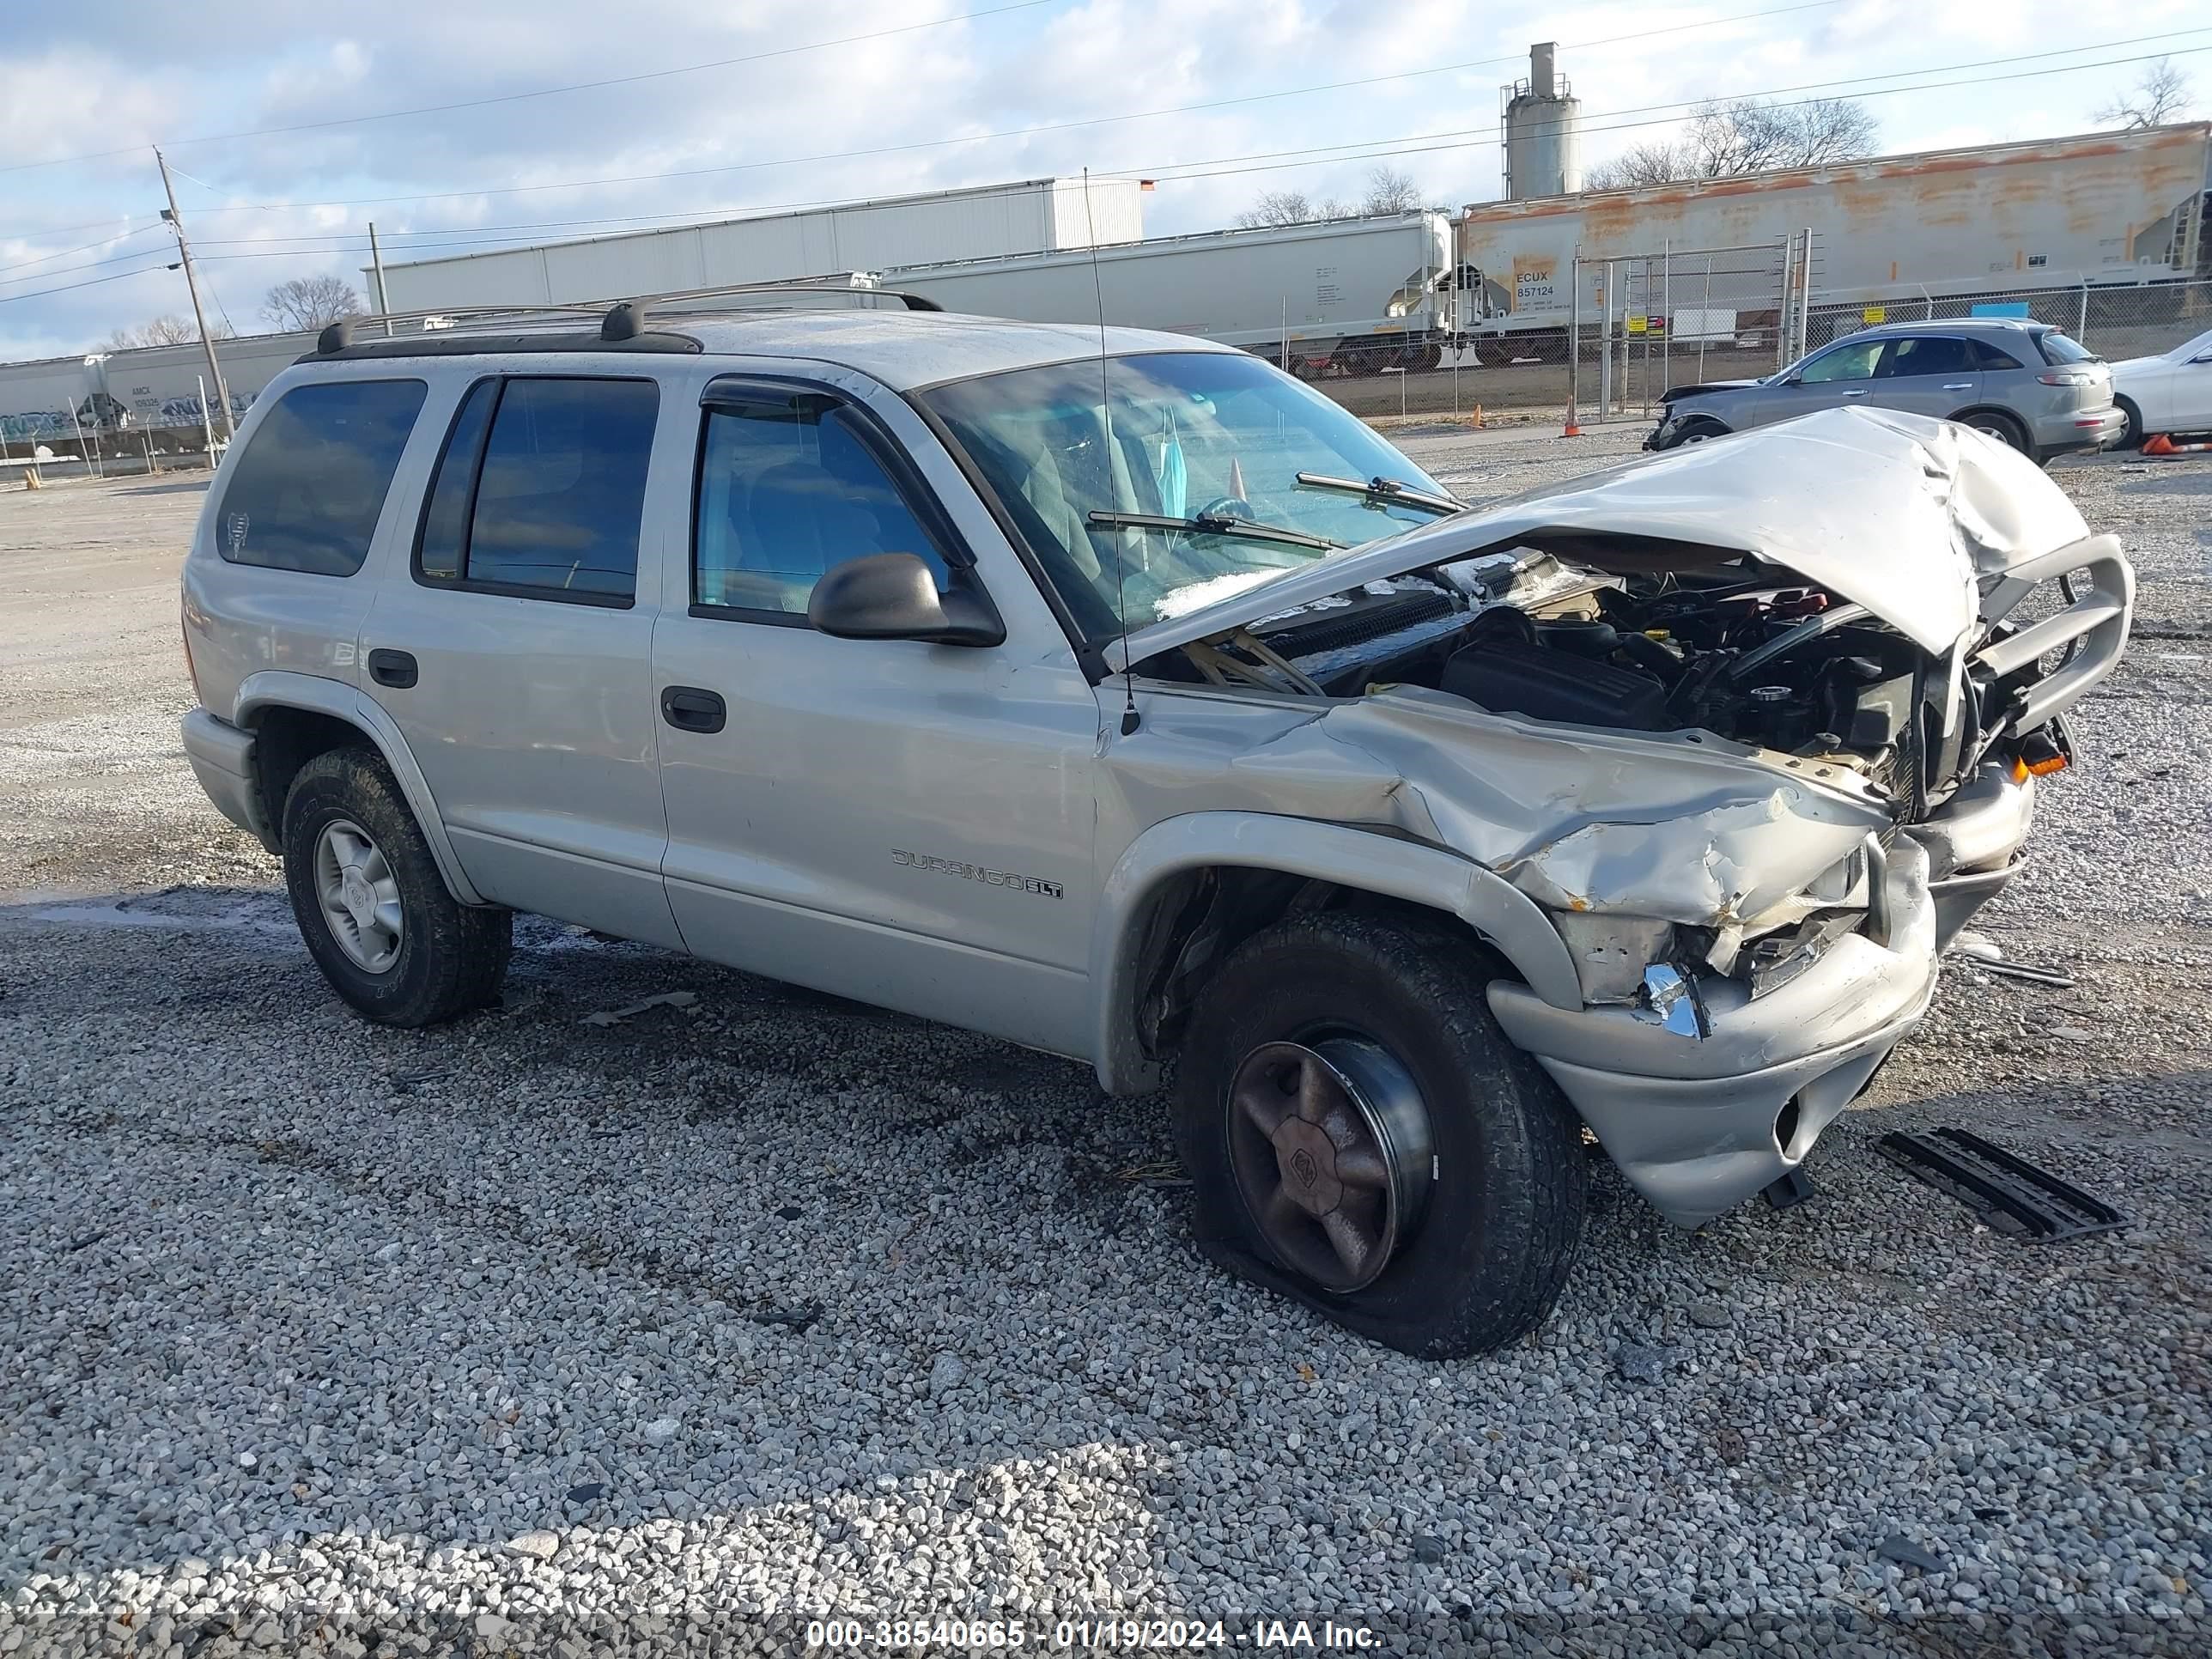 vin: 1B4HS28Y1XF611274 1B4HS28Y1XF611274 1999 dodge durango 5200 for Sale in 37404, 2801 Asbury Park St, Chattanooga, Tennessee, USA